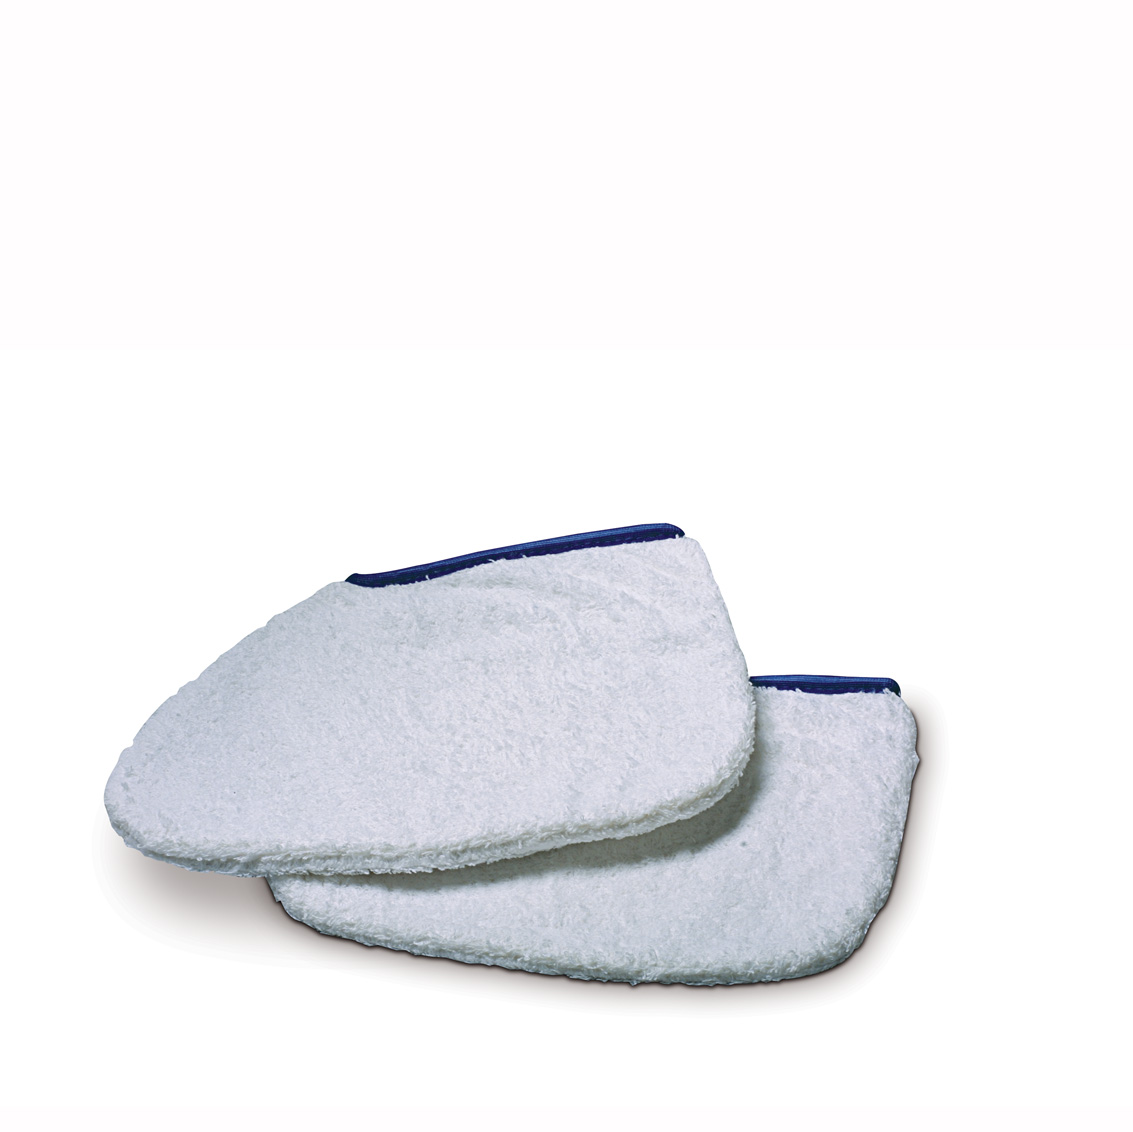 Terry socks for paraffin treatment 1 pair